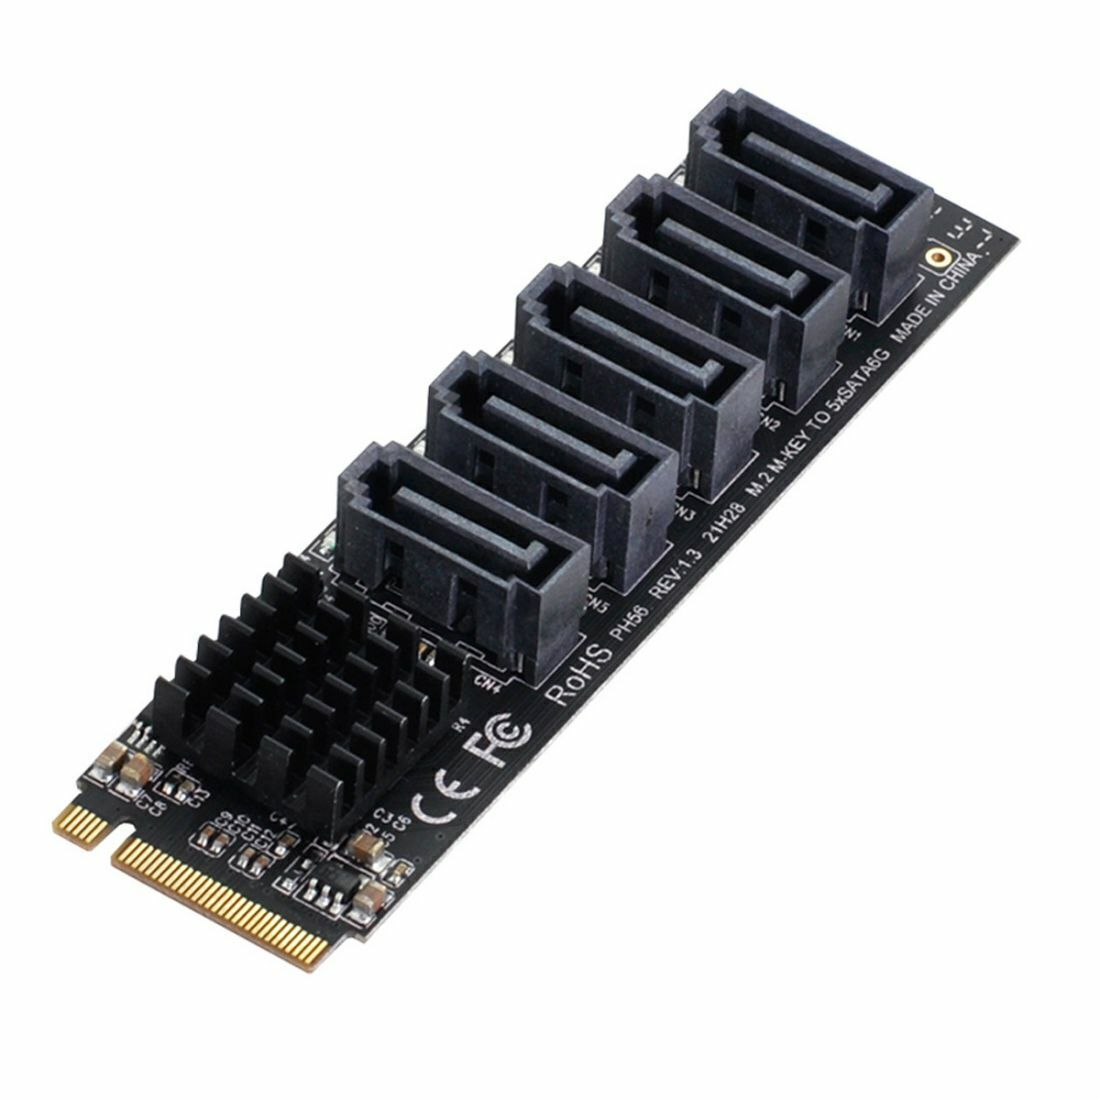 Jimier M.2 NGFF NVME M-Key PCI Express to SATA 3.0 5 Port Adapter Extension Card